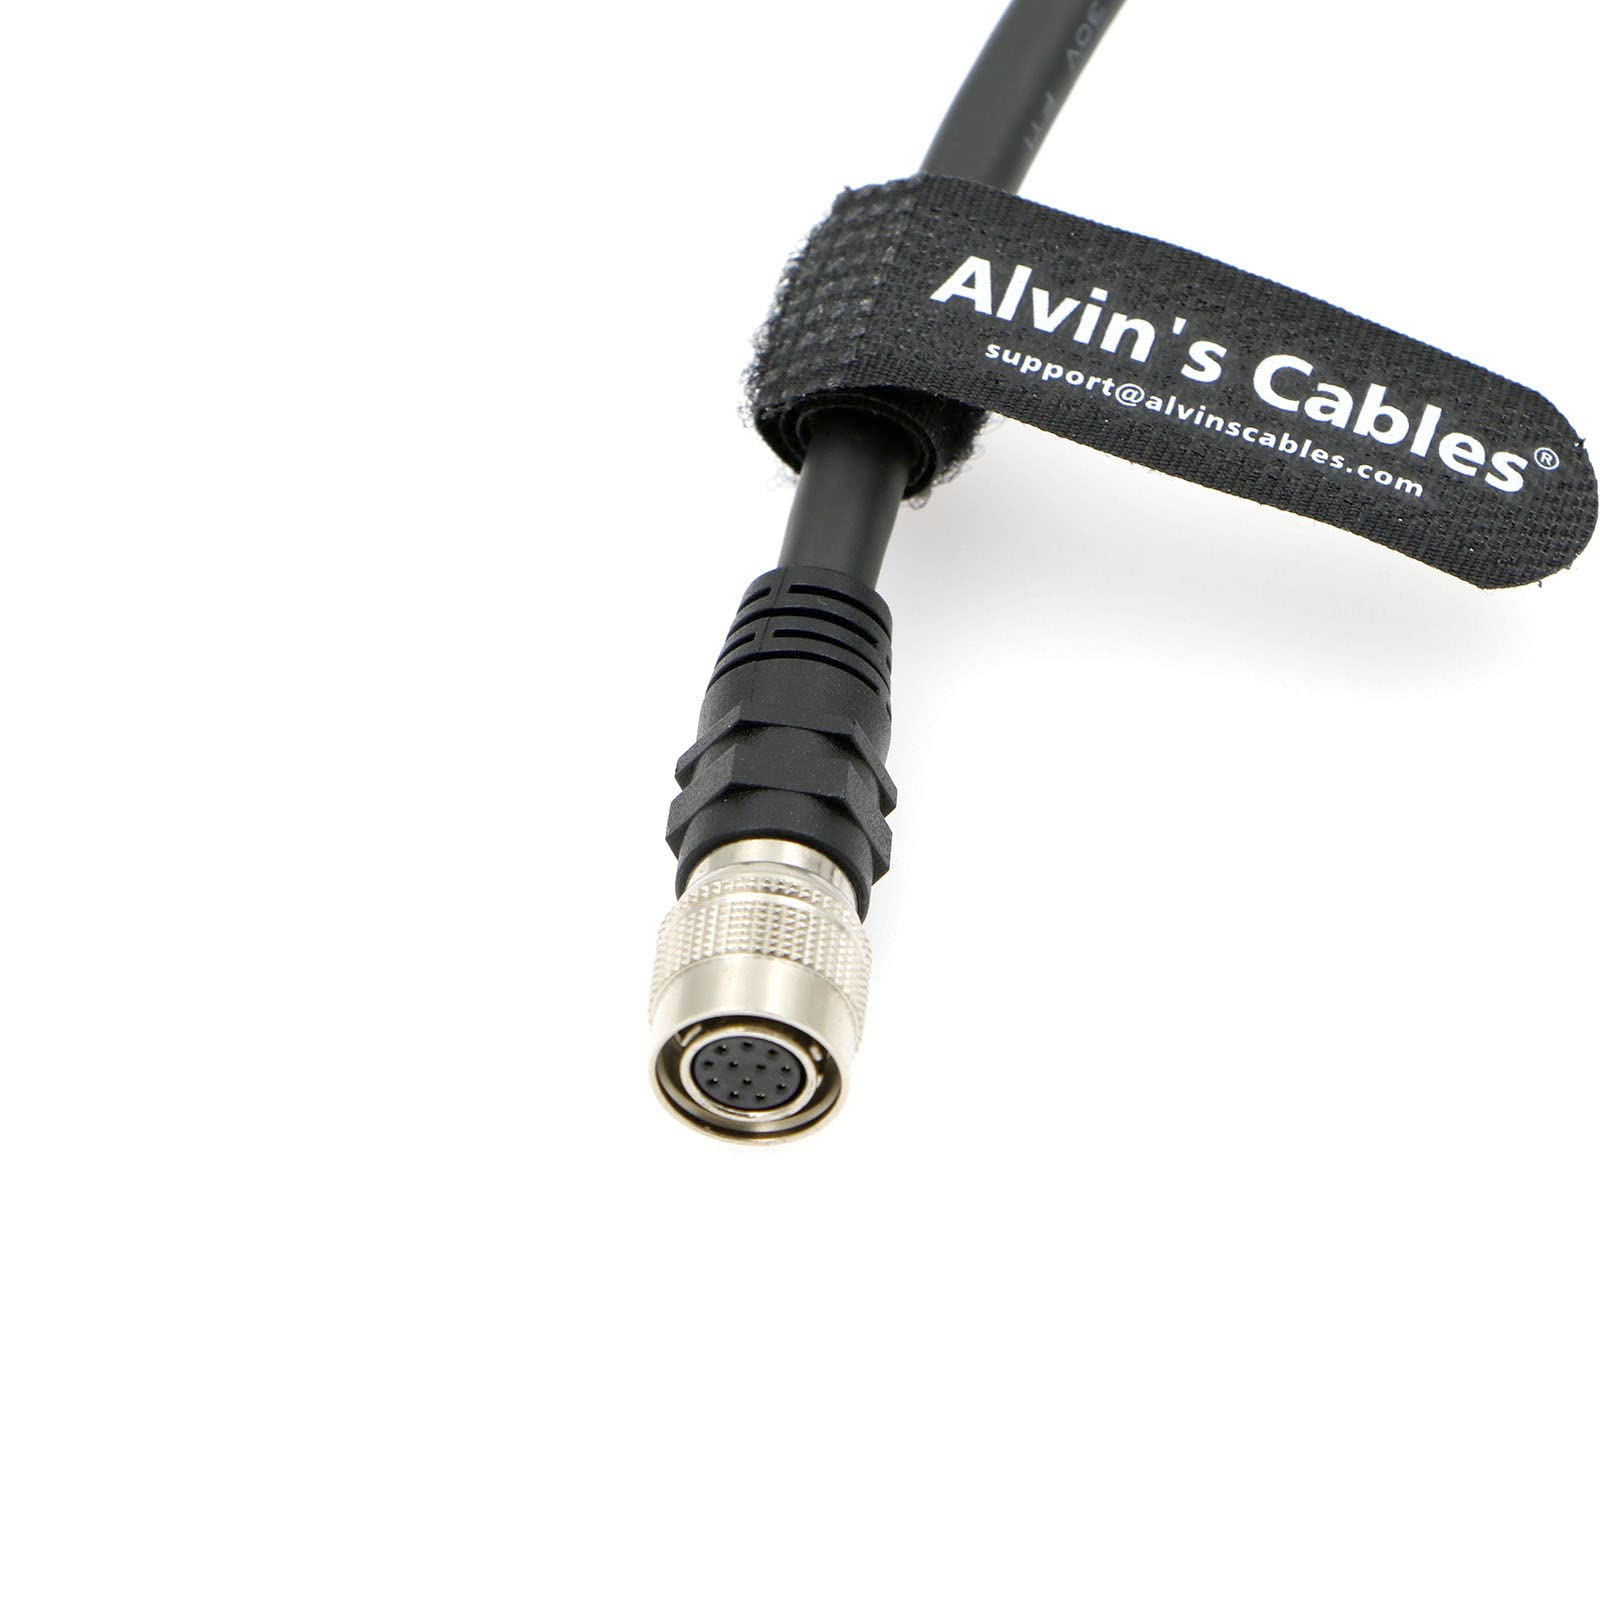 Alvin's Cables Hirose 12 Pin Female HR10A-10P-12S to Open End Shielded I/O Shielded Cable for Sony CCD| Basler Gige| AVT GIGE Industrial Camera 3M| 9.84ft